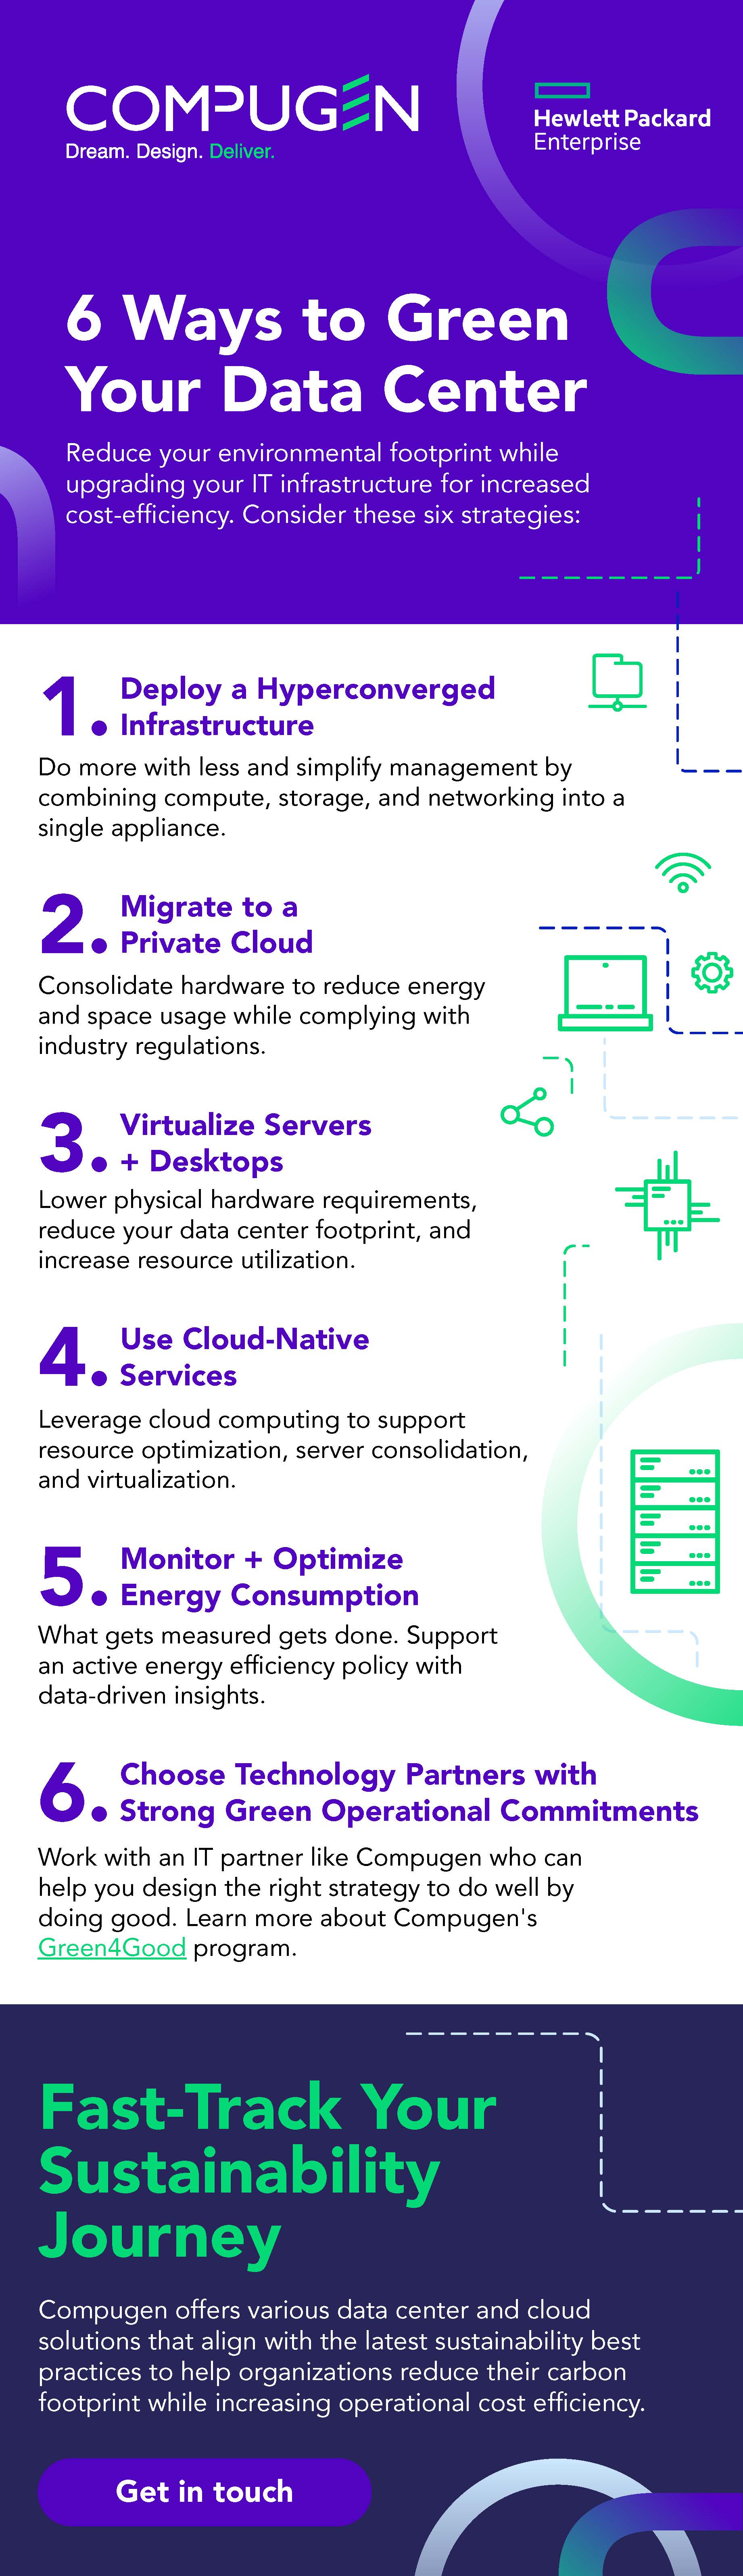 6 Ways to Green Your Data Center HPE Infographic - EN